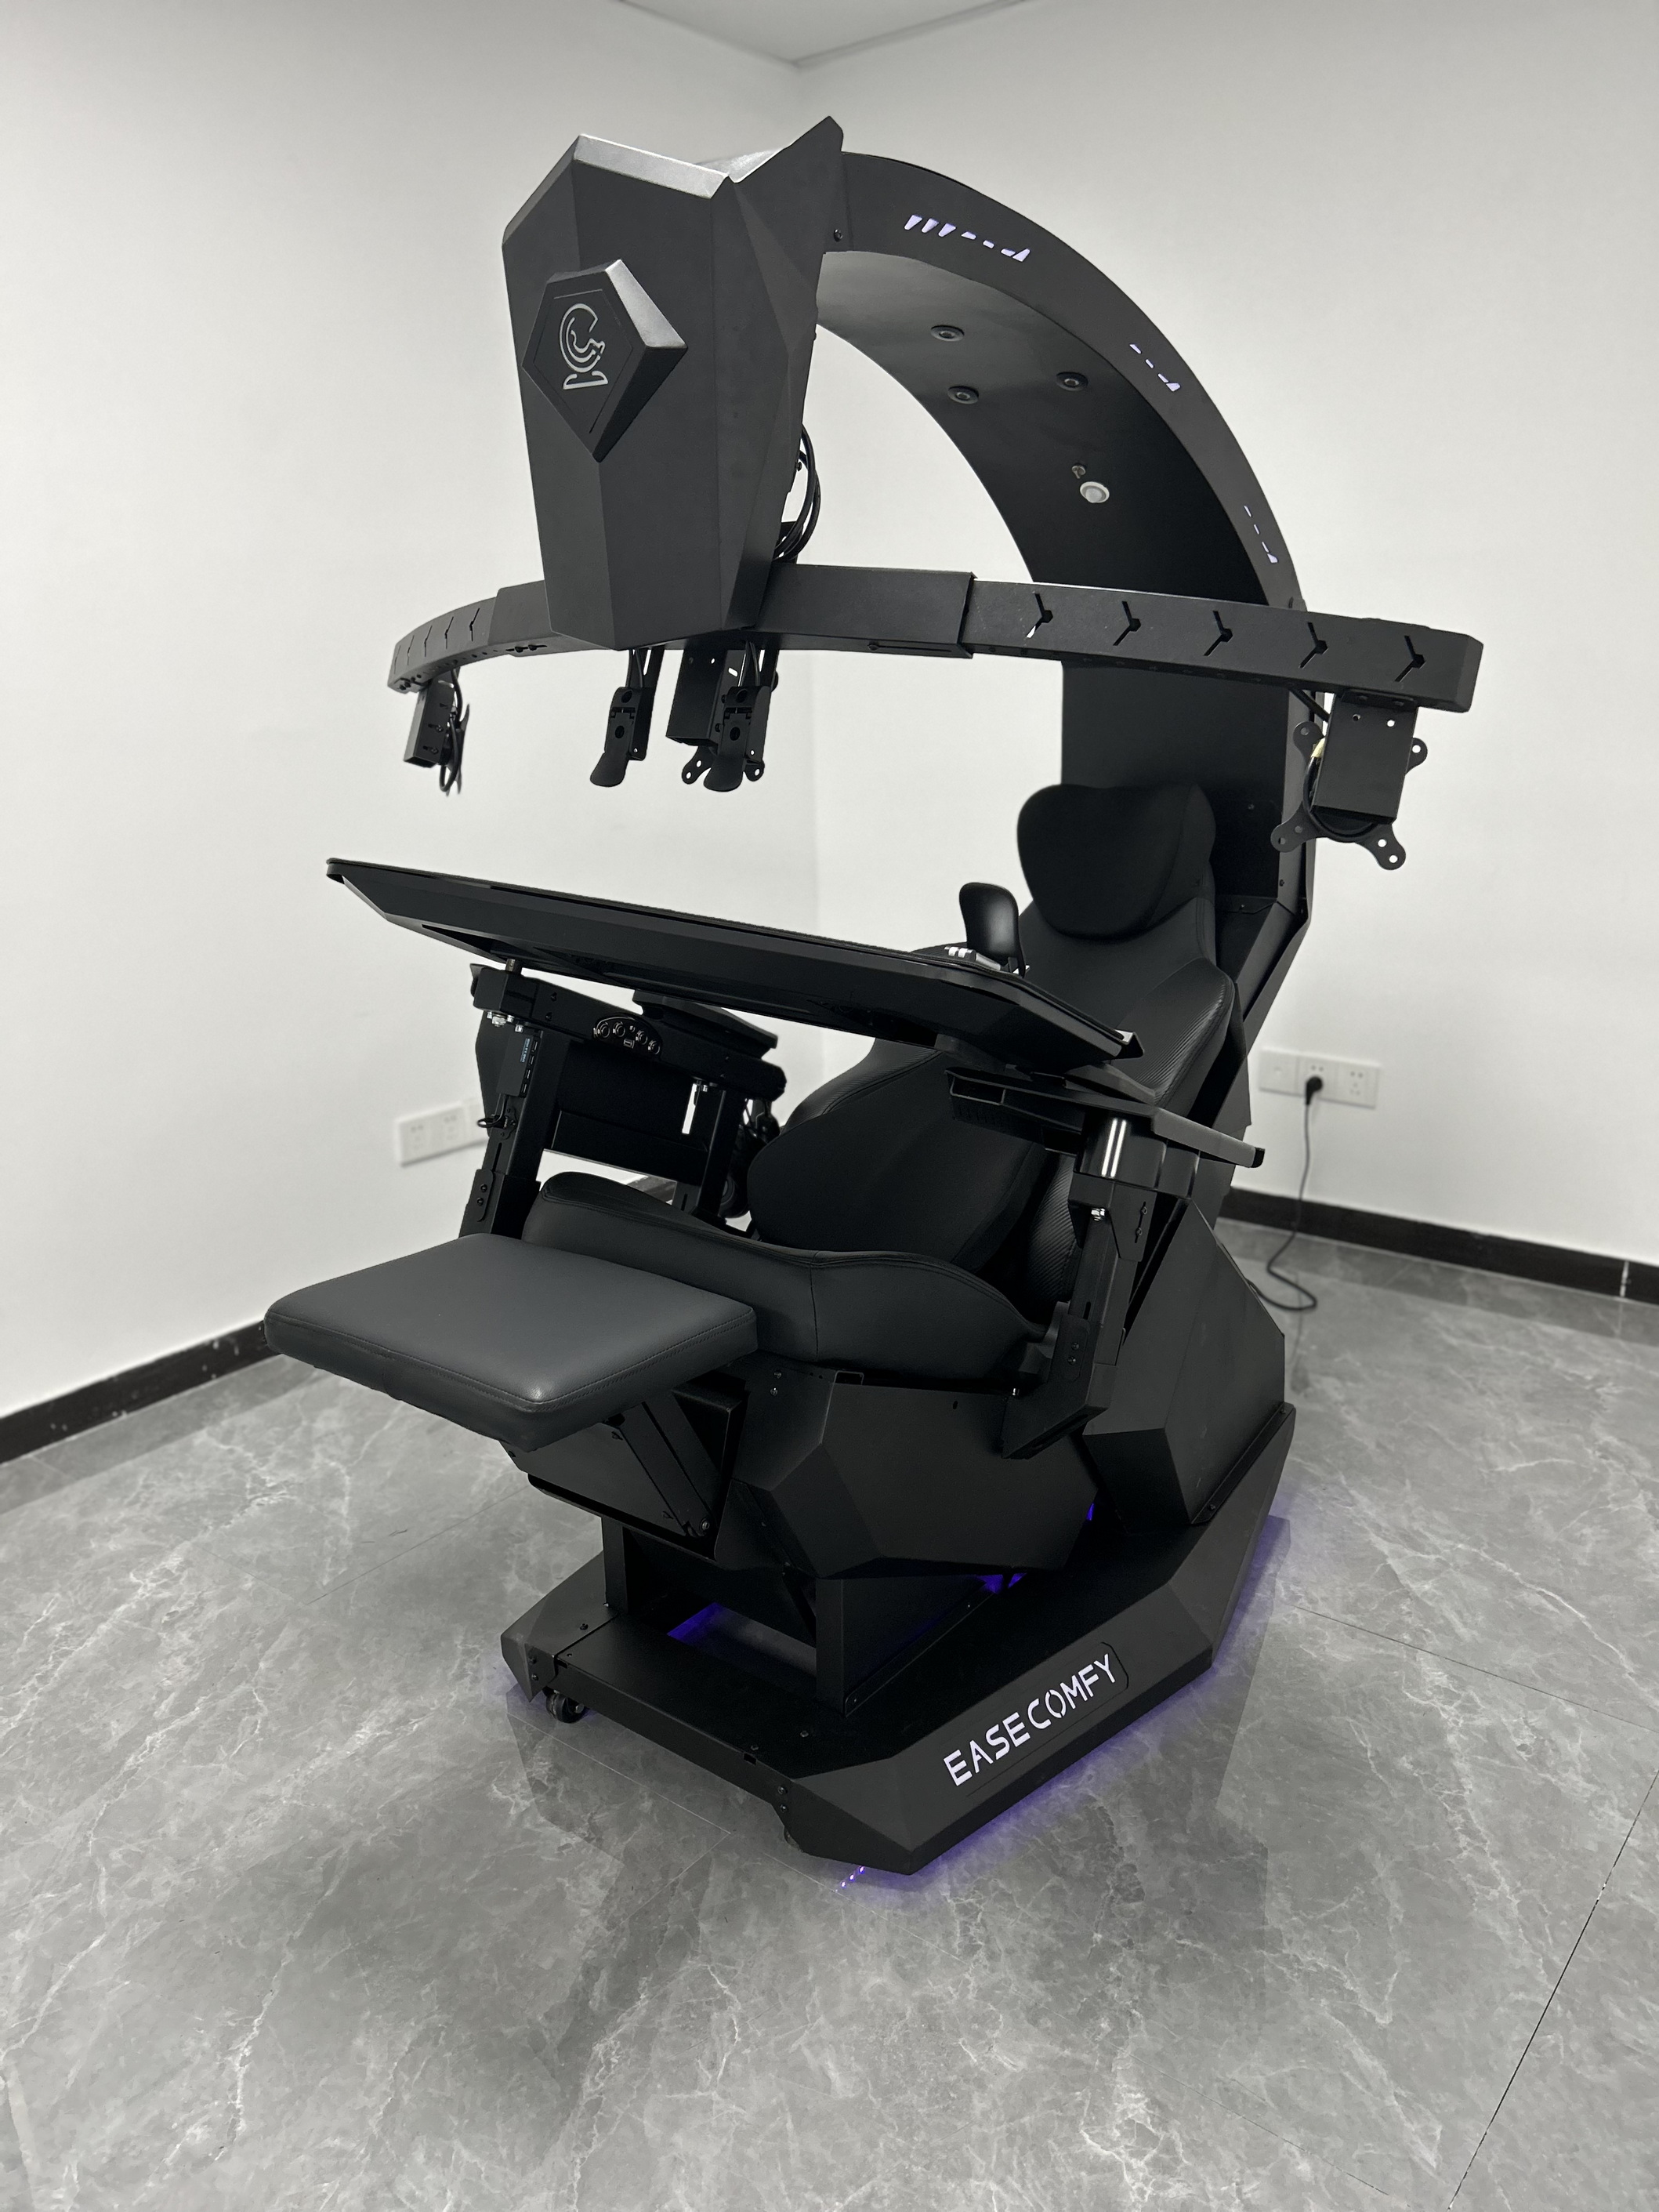 EASE COMFY T2 Throne Chair cockpit full functional easy afford and install support multi monitor zerg gravity chair cockpit